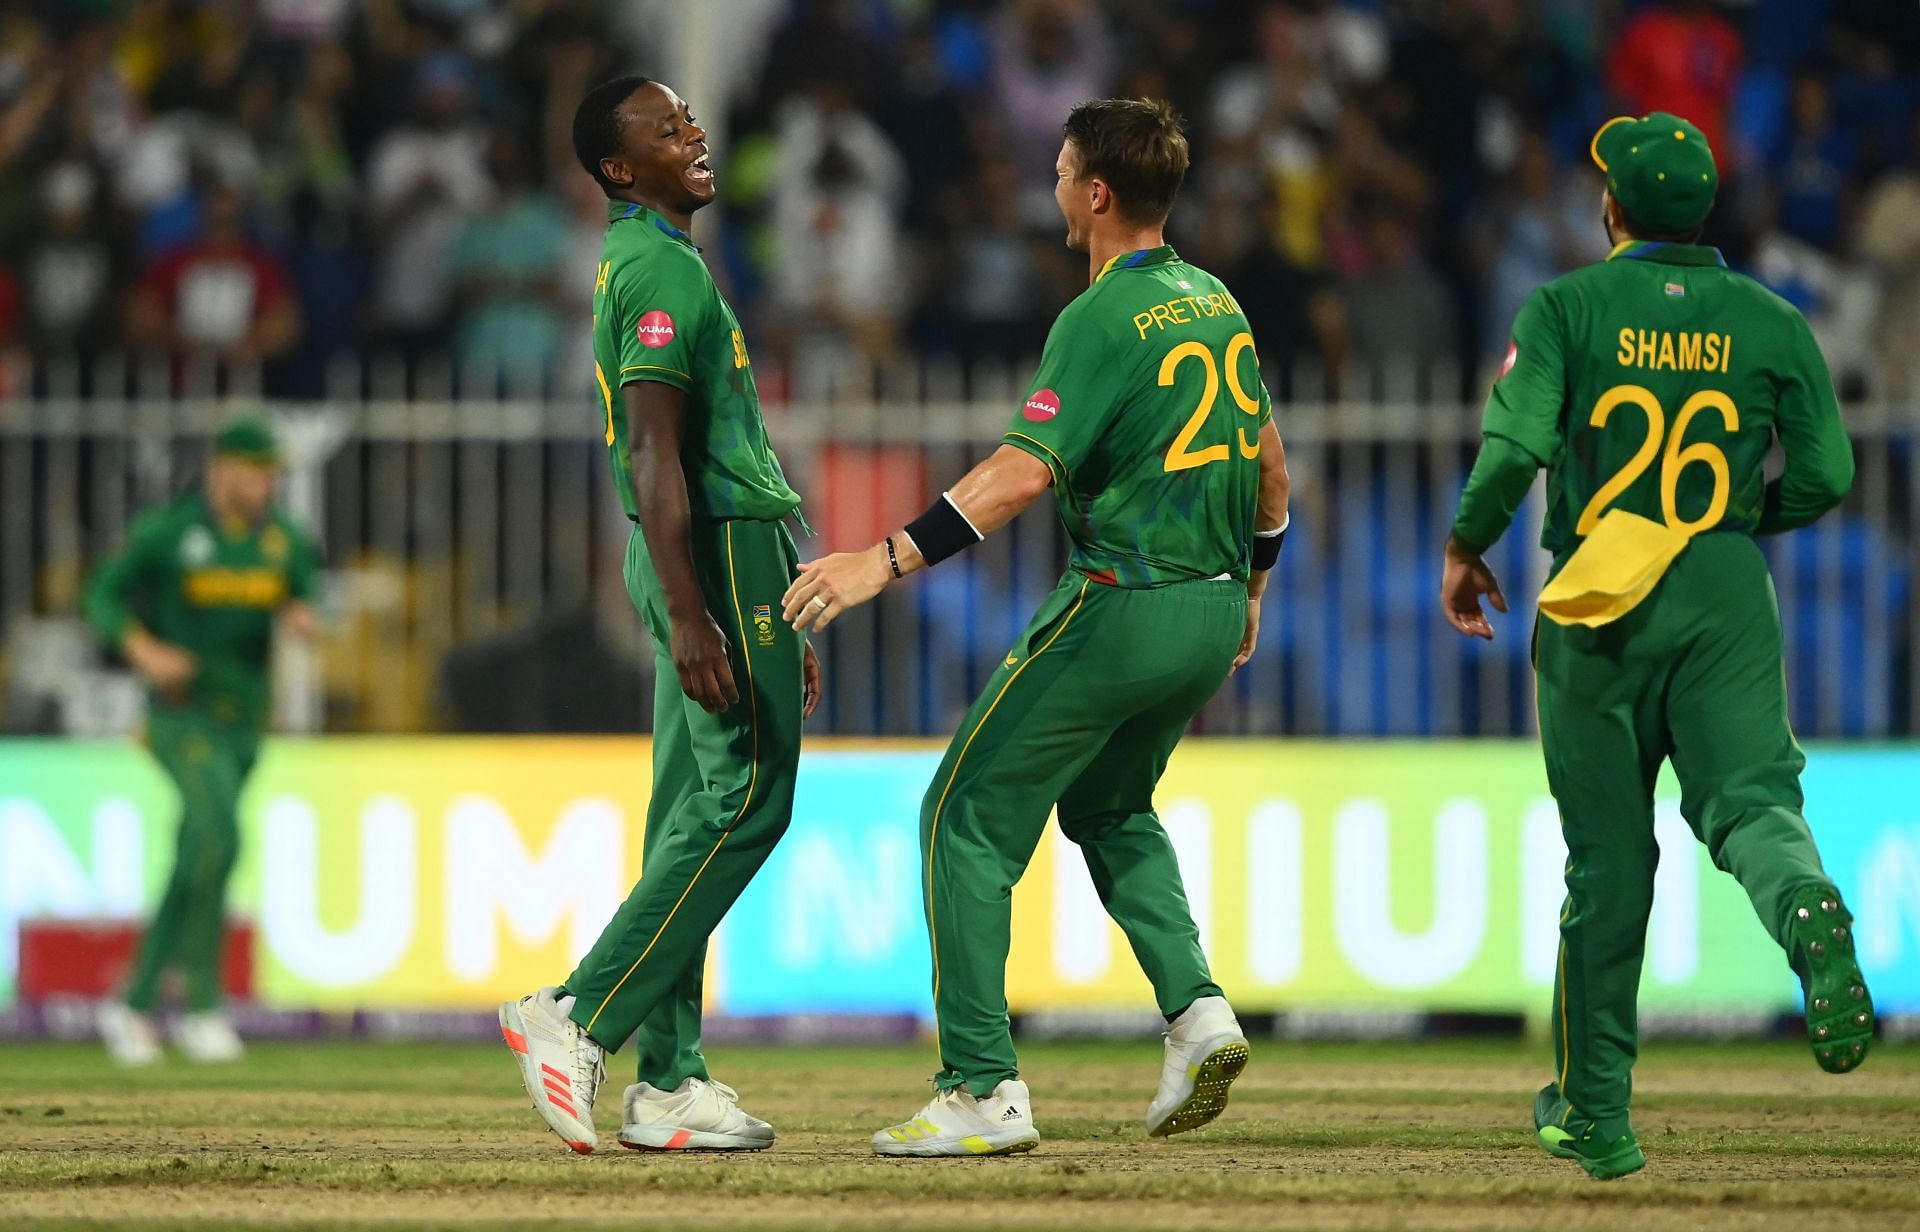 Kagiso Rabada took a hattrick in the final over the game (Credit: Getty Images)